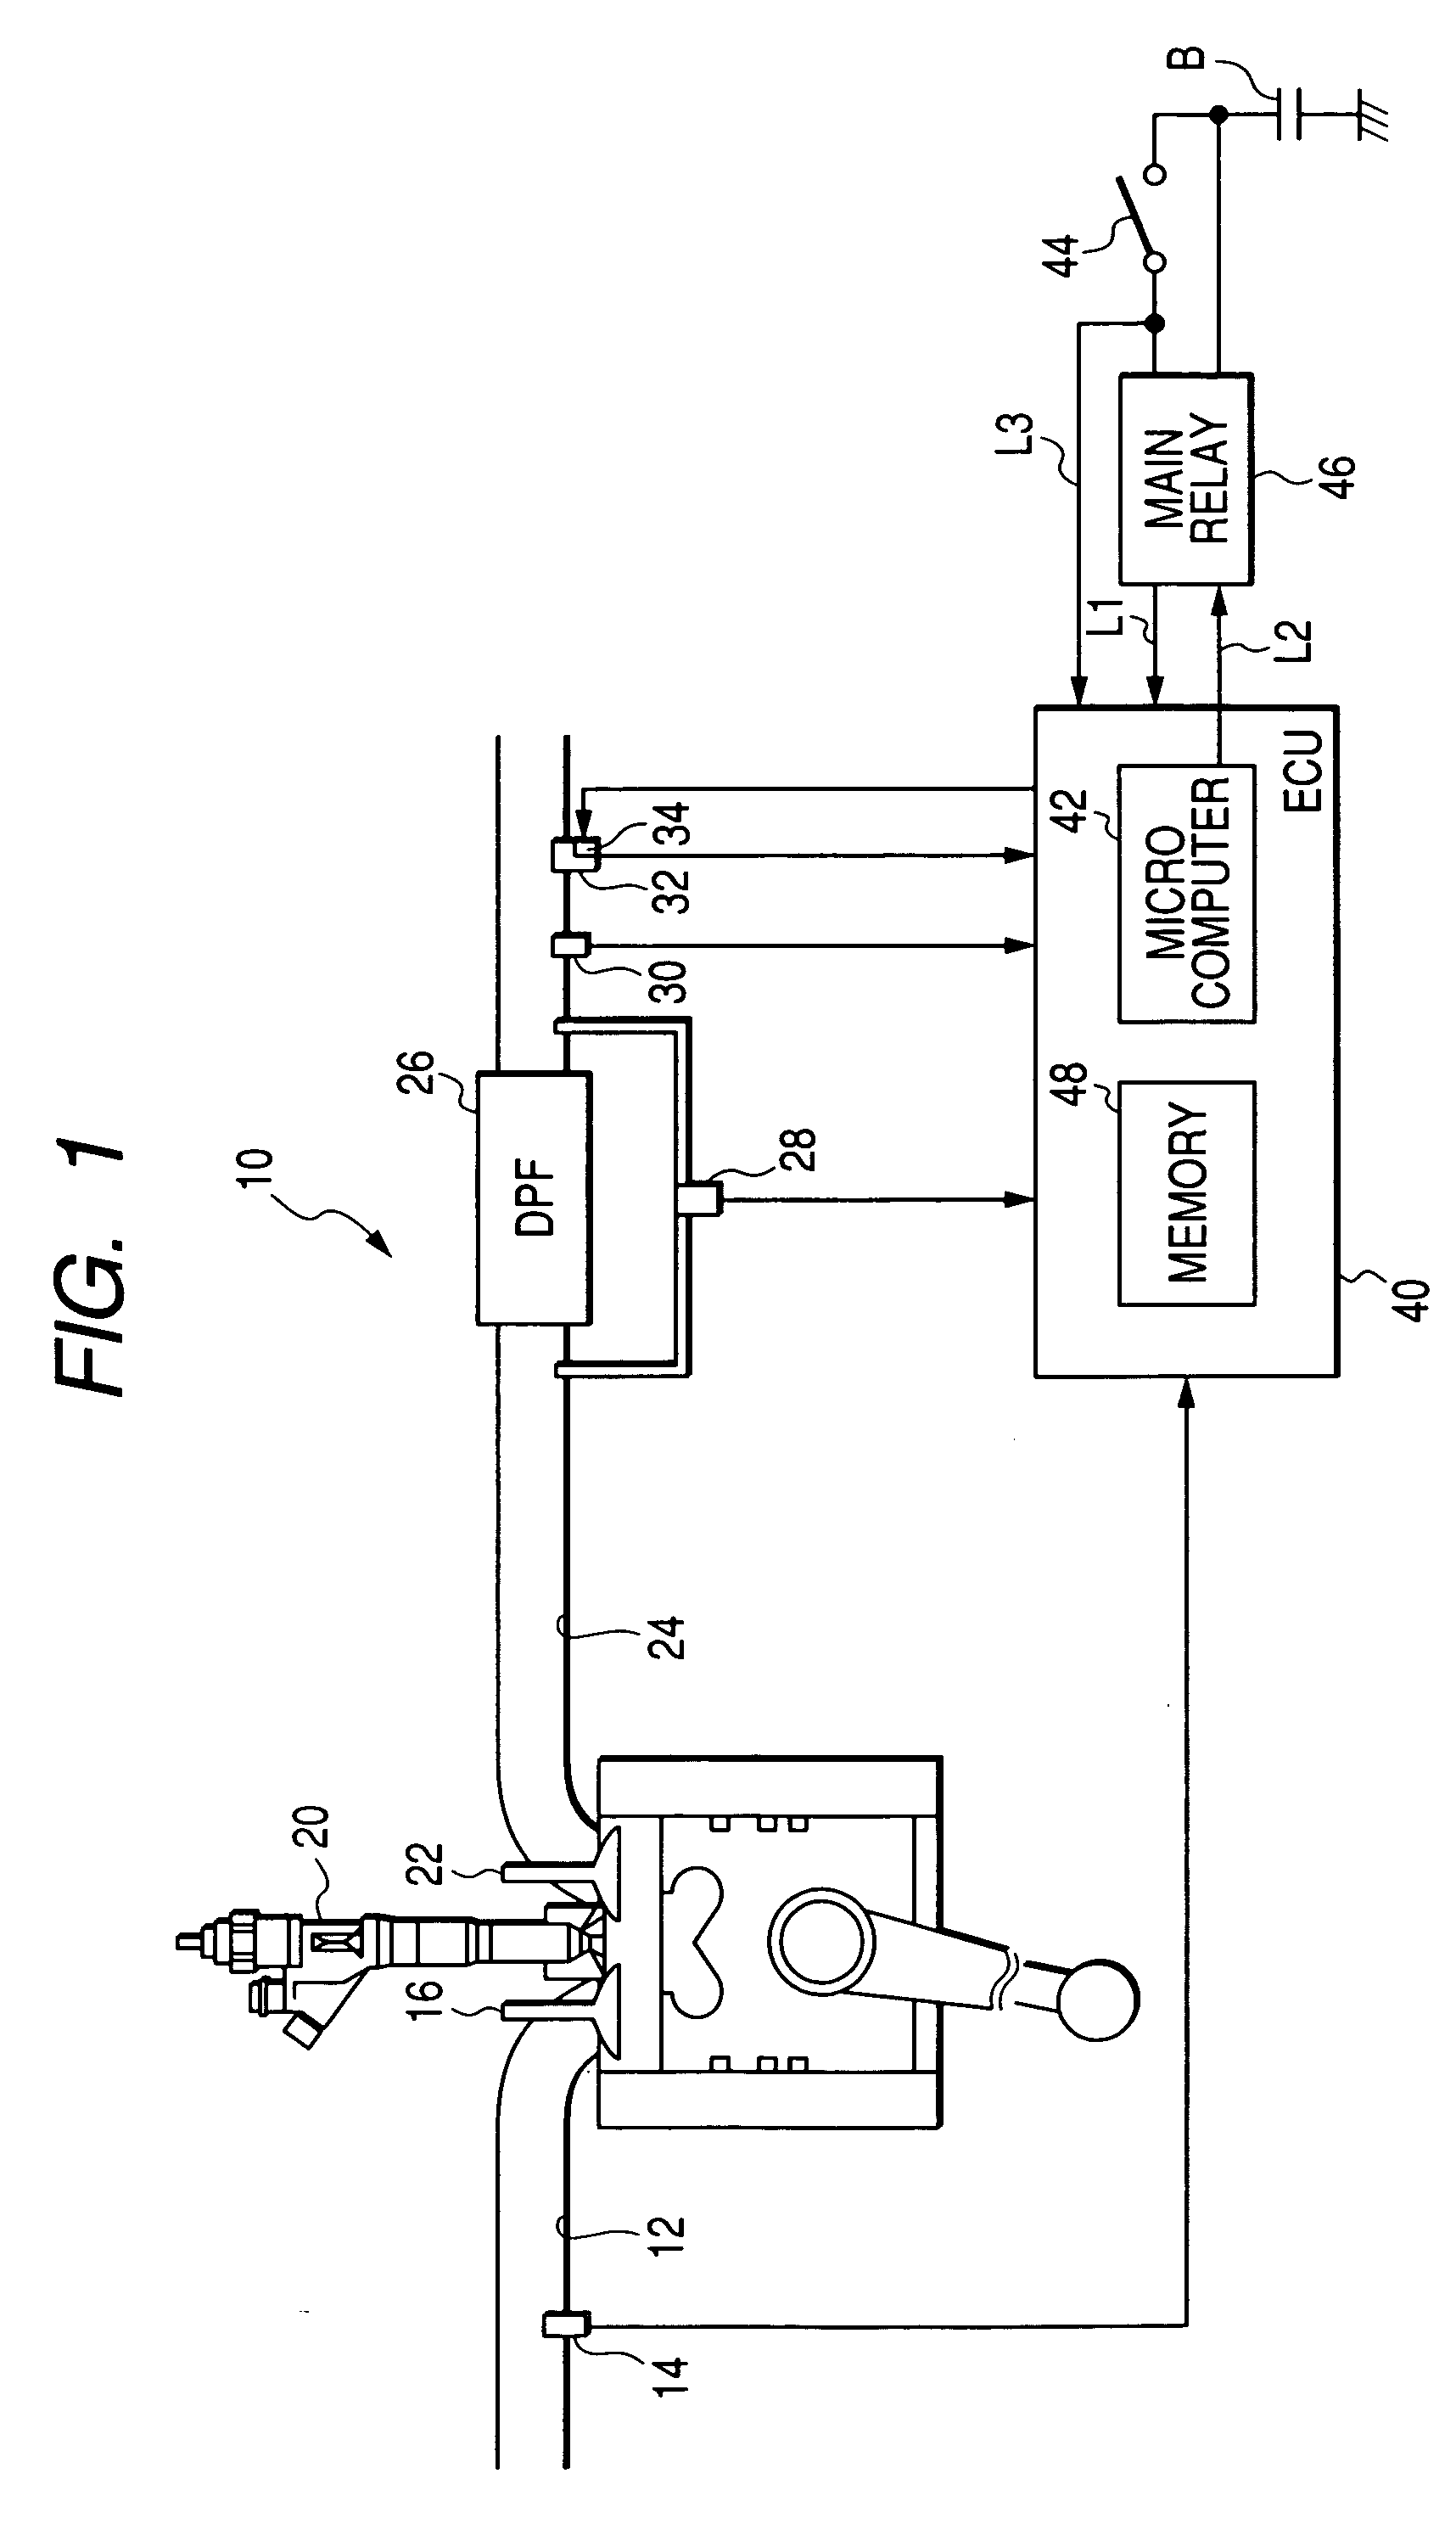 Control system designed to minimize deterioration of exhaust gas sensor for use in diesel engine